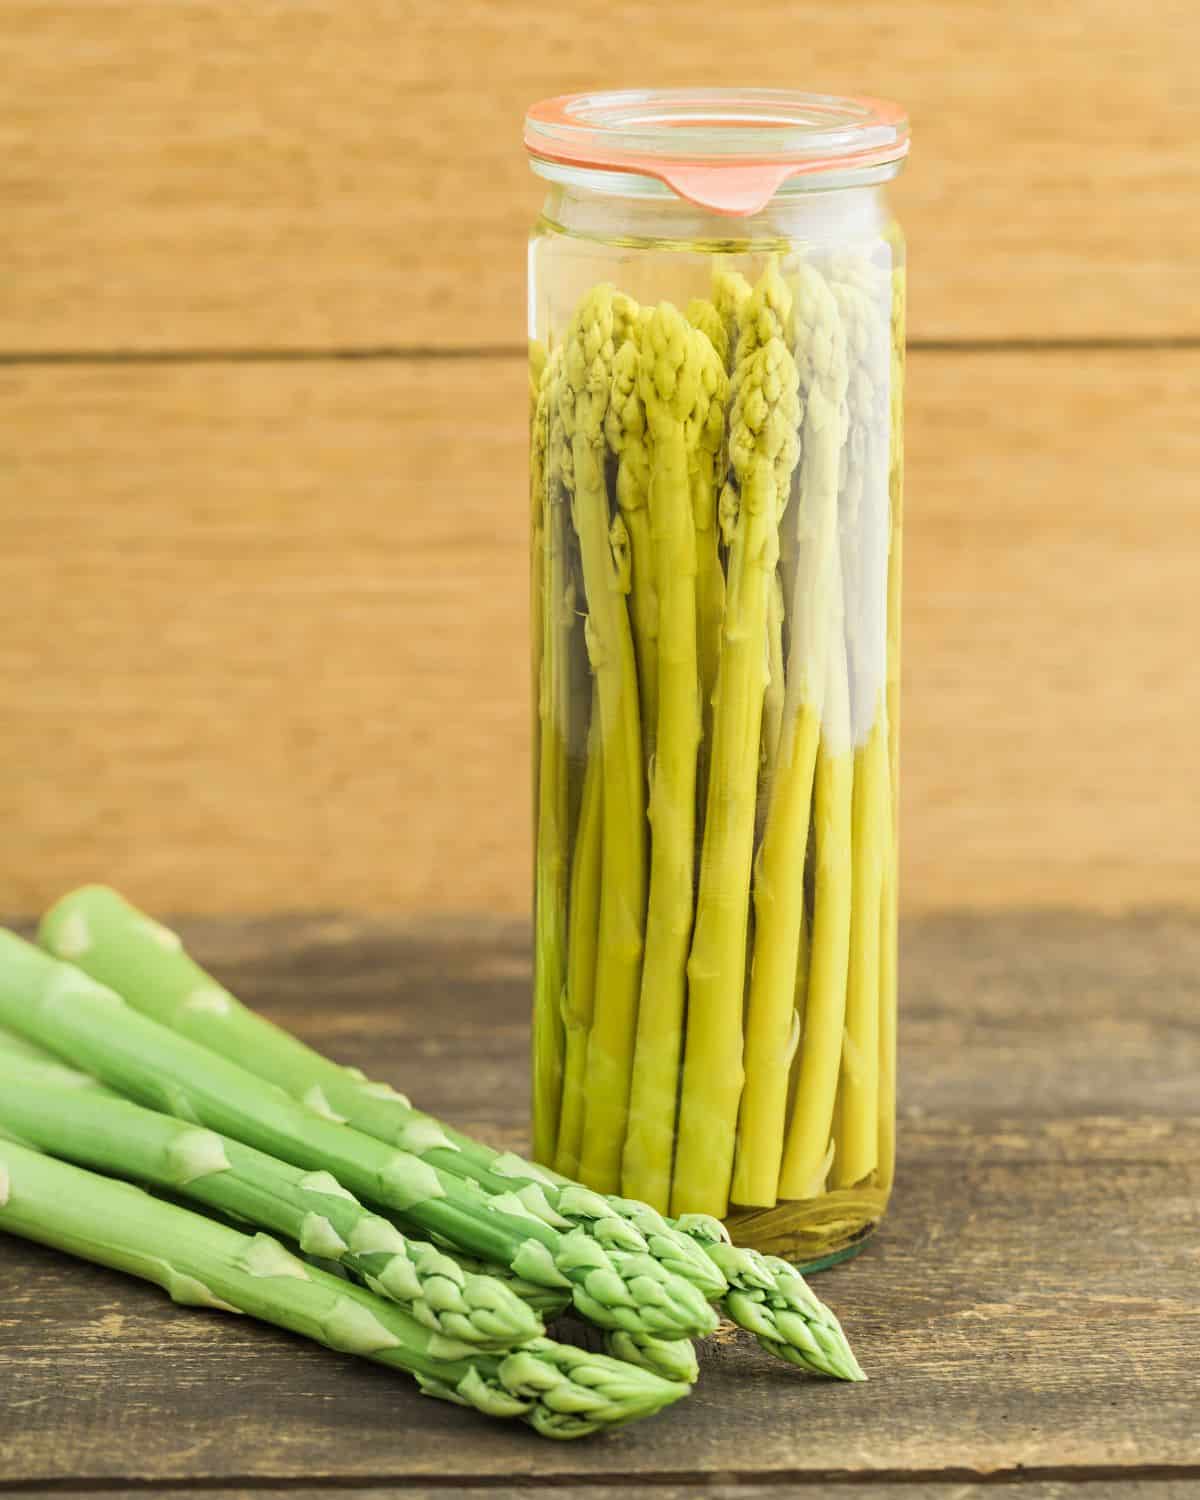 Canned asparagus in a glass jar, fresh asparagus laying next to the jar.